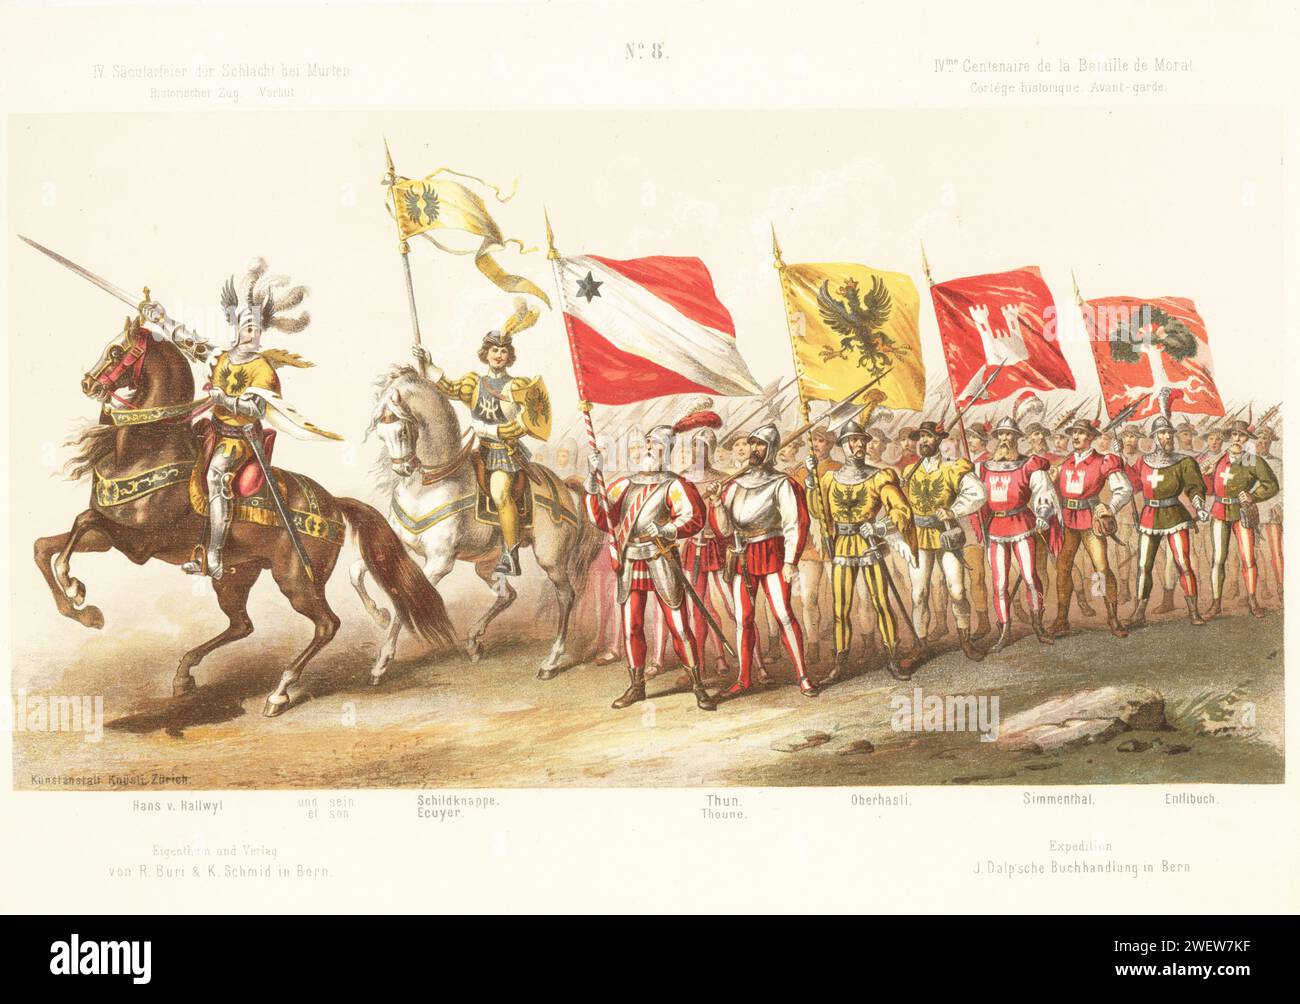 Swiss army commander Hans von Hallwyl, his son, his equerry, and infantry platoons of pikemen and macemen from Thun, Oberhasli, Simmenthal, Entlibuch. Chromolithograph by C. Knusli from Album du Cortege Historique de Morat, reenactment pageant on the 400th anniversary of the Battle of Murten, Buri, Zurich, 1876. Stock Photo